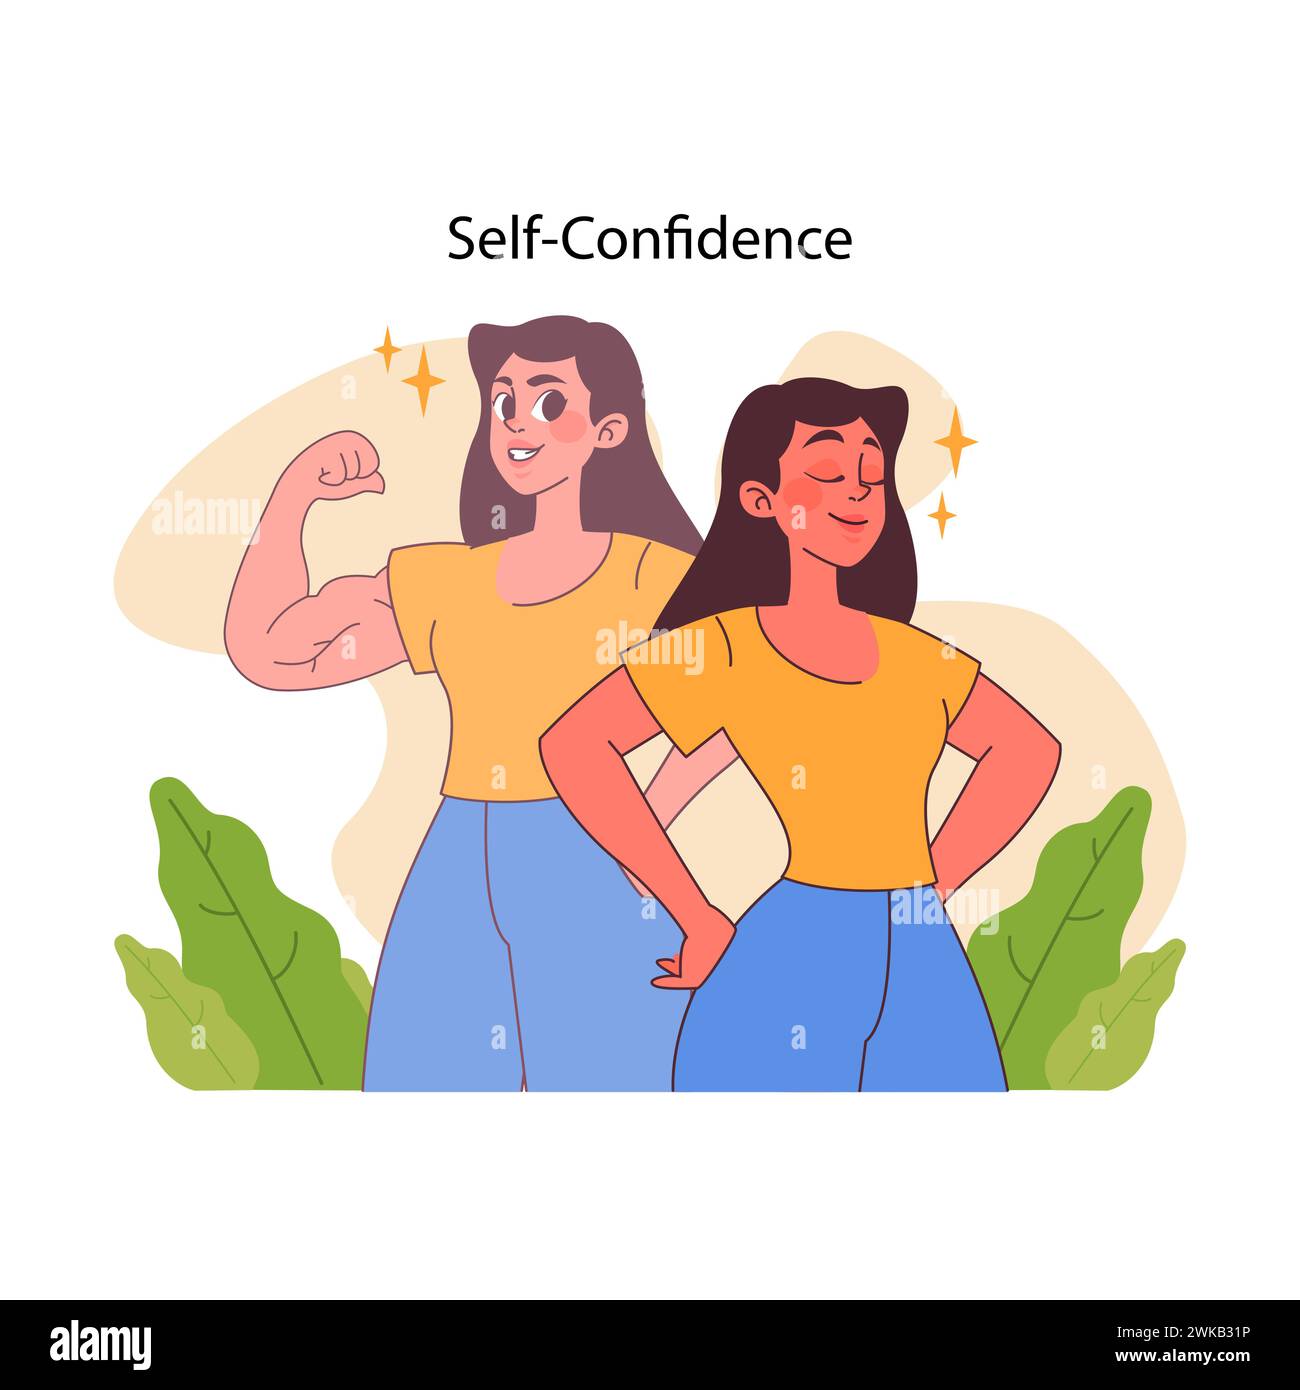 Self-confidence theme. Woman posing confidently while her blurred self shows muscles. Strong self-belief and empowerment. Individual strength and personal assurance. Flat vector illustration Stock Vector